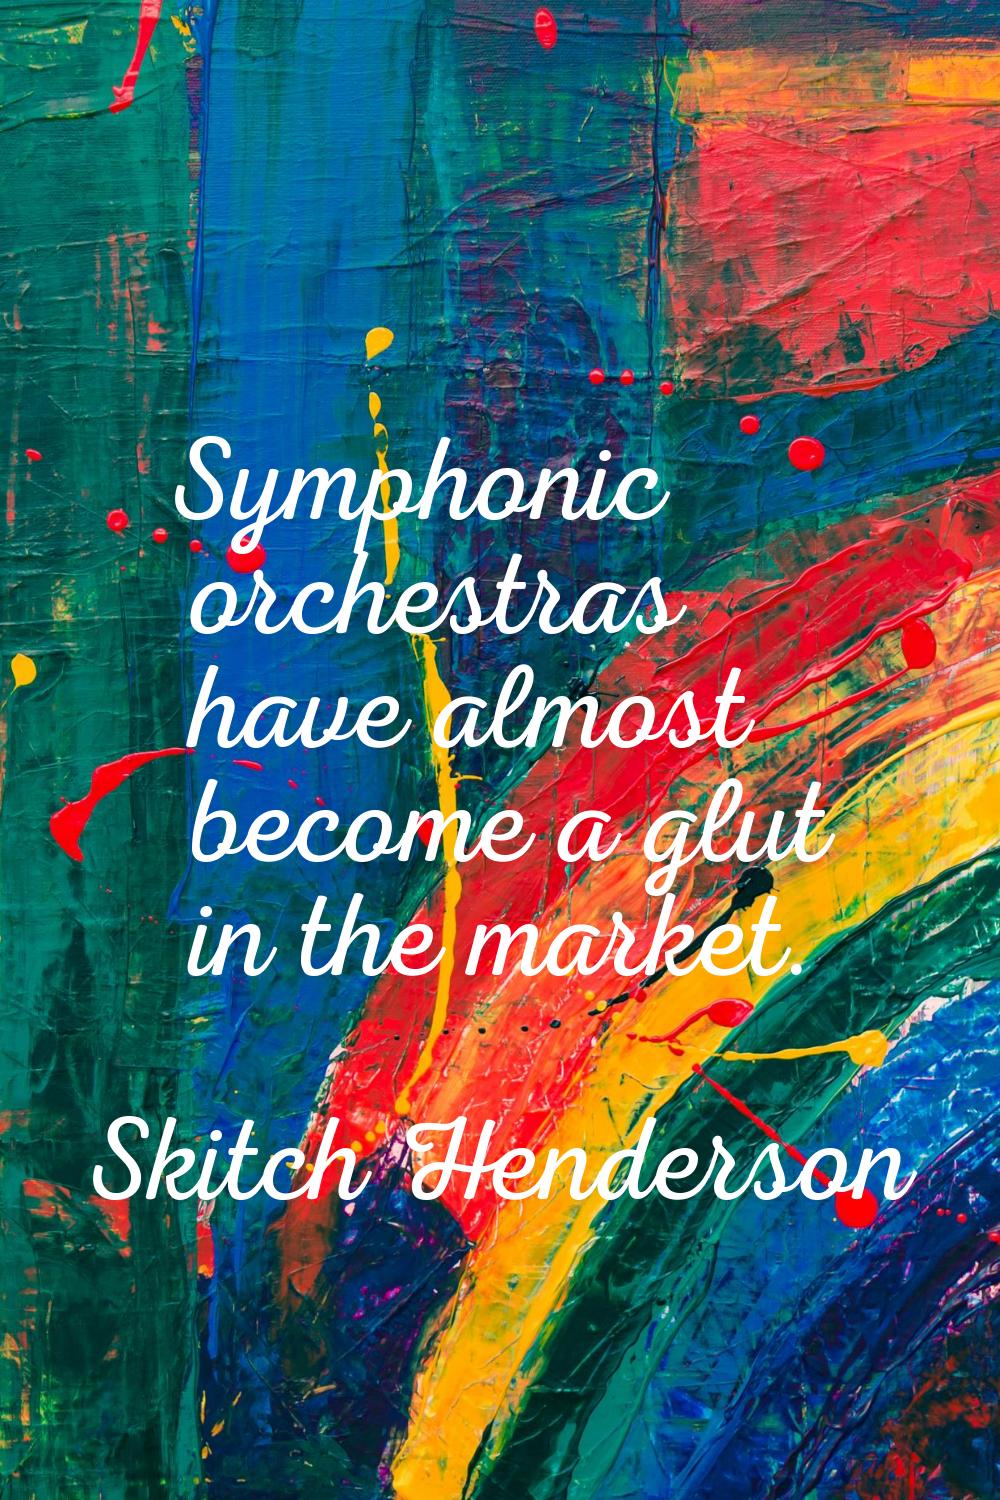 Symphonic orchestras have almost become a glut in the market.